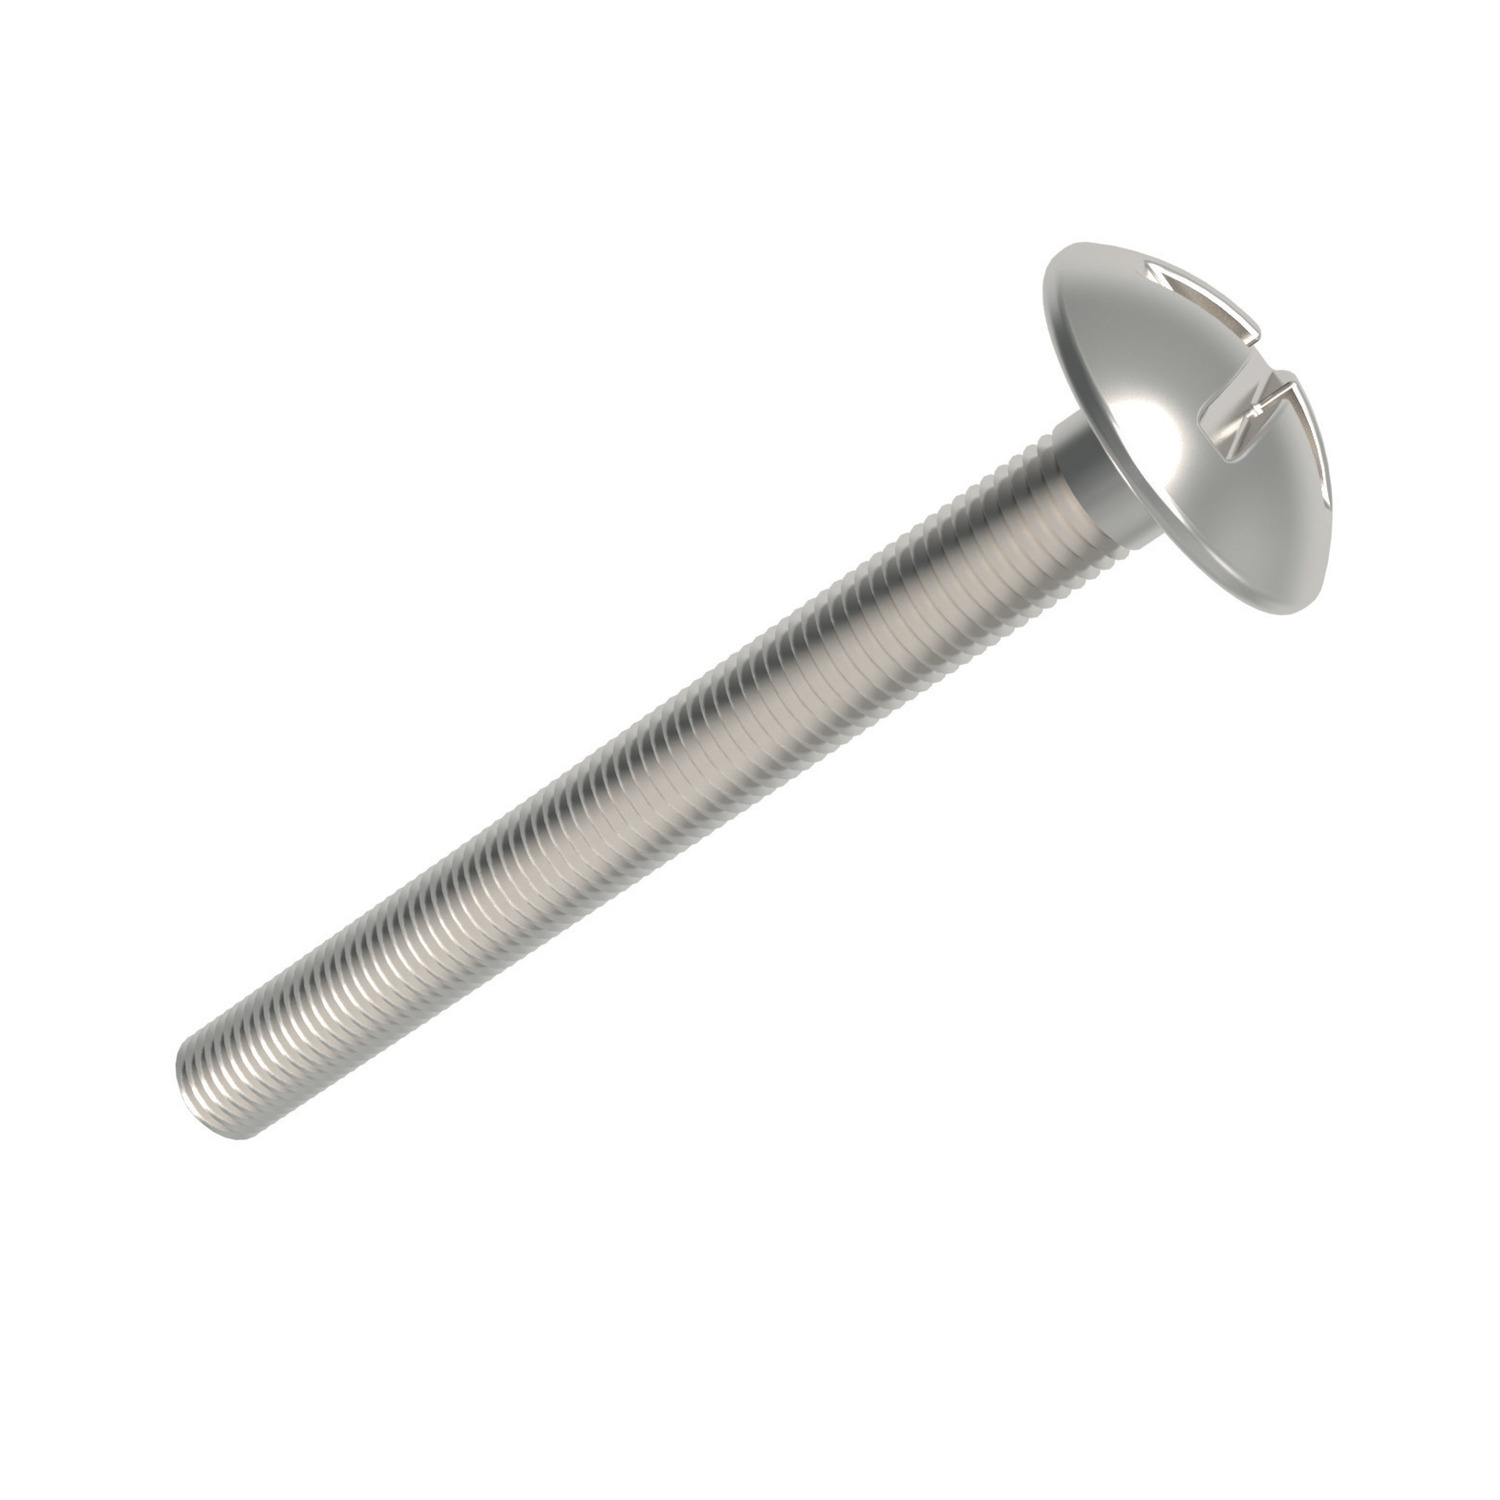 Product P0269.ZP, Roofing Bolts Roofing Bolts - steel, zinc-plated / 